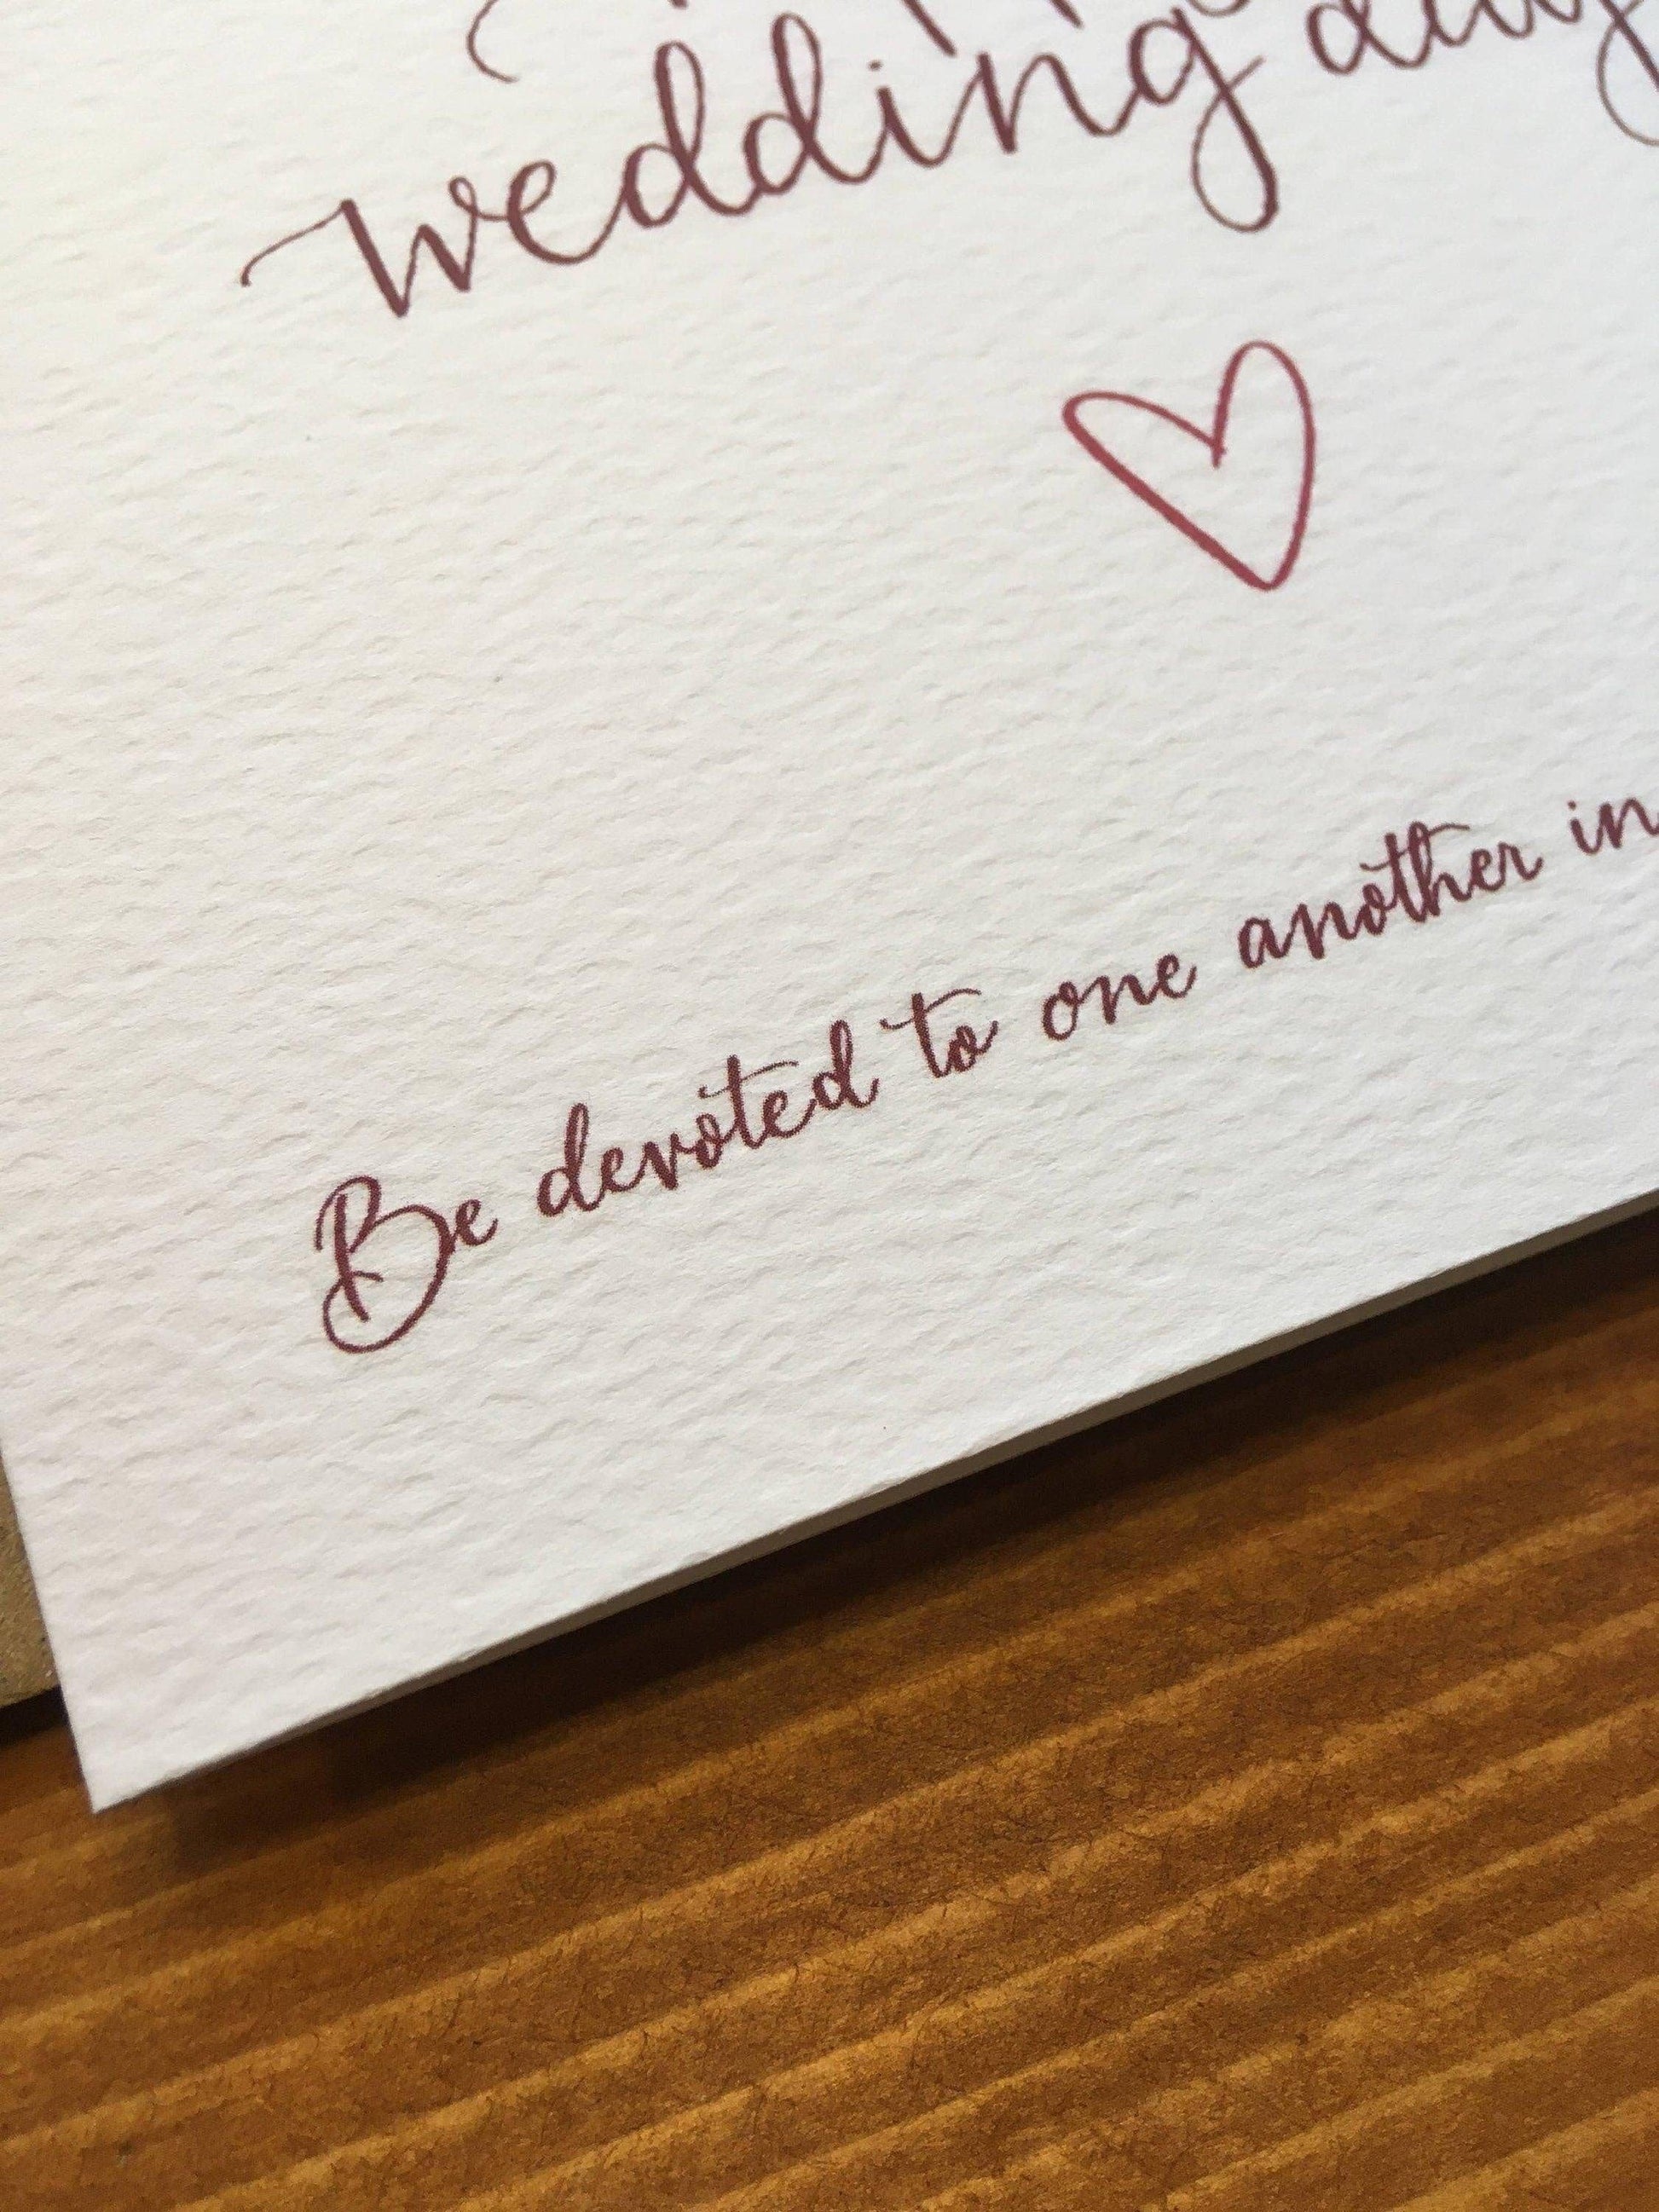 Hand lettered Romans 12:10 Bible verse on wedding card